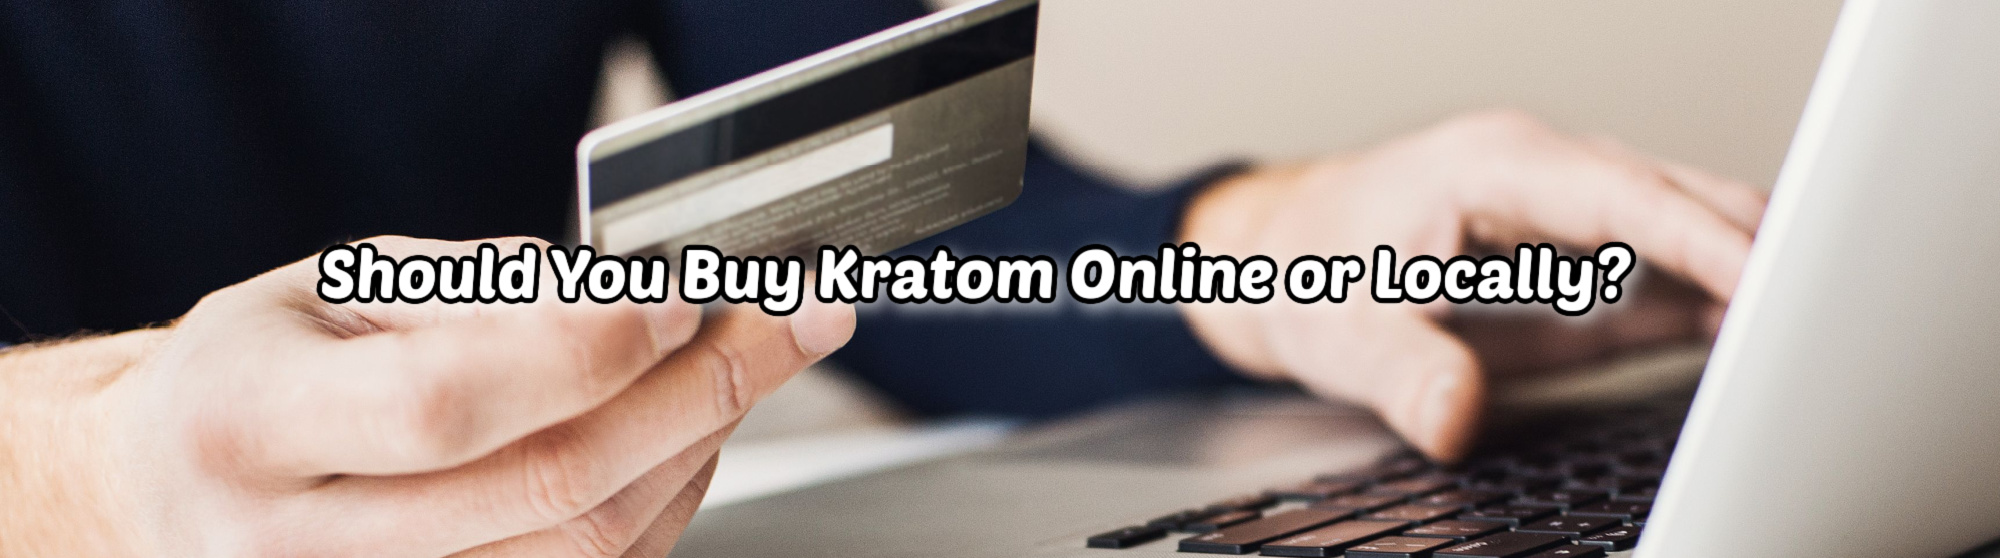 image of should you buy kratom online or locally